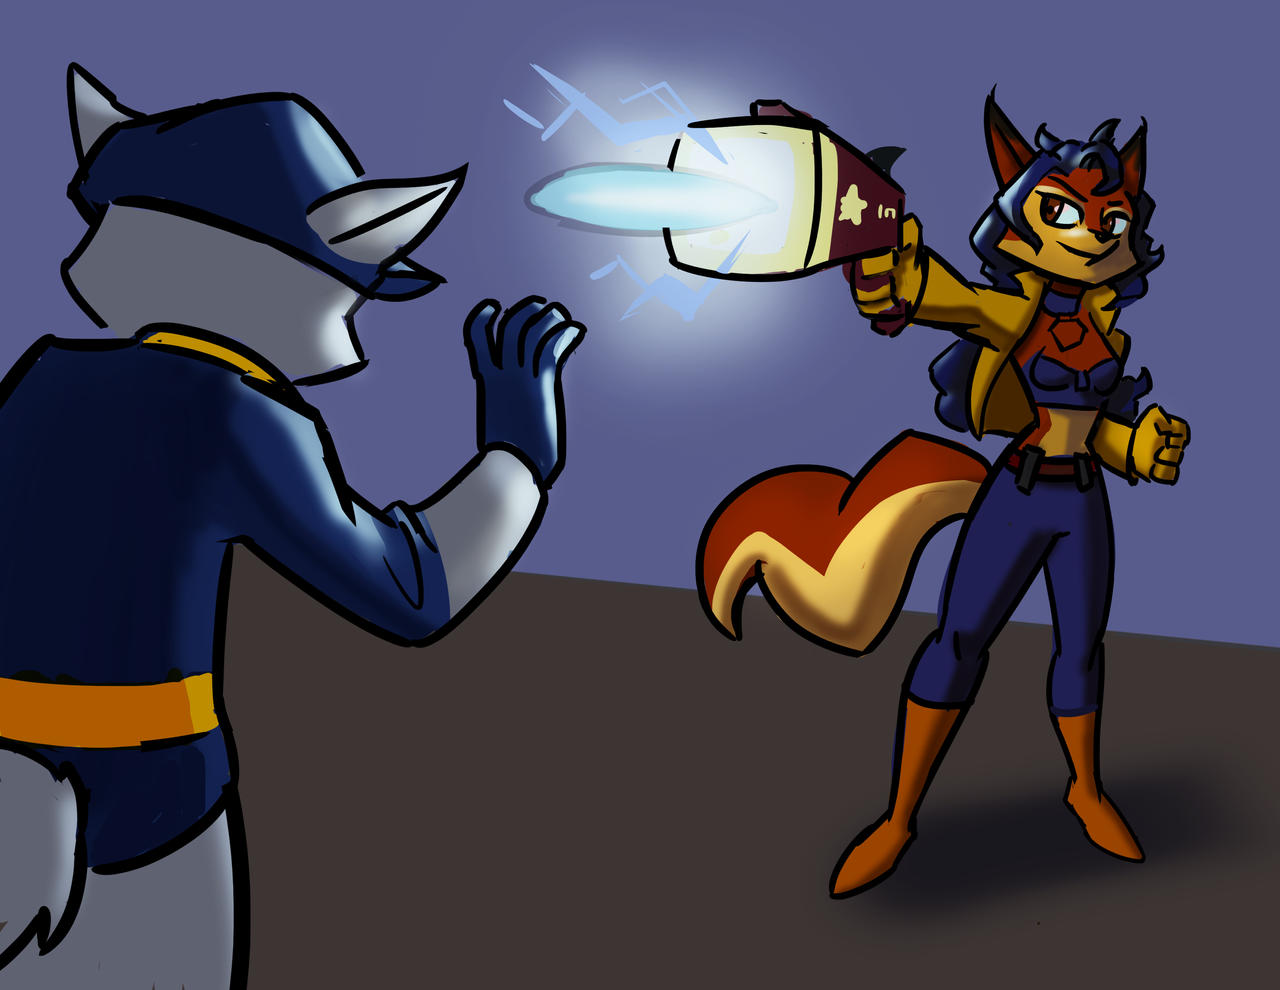 Sly Cooper and Cie favourites by JennissyCooper on DeviantArt